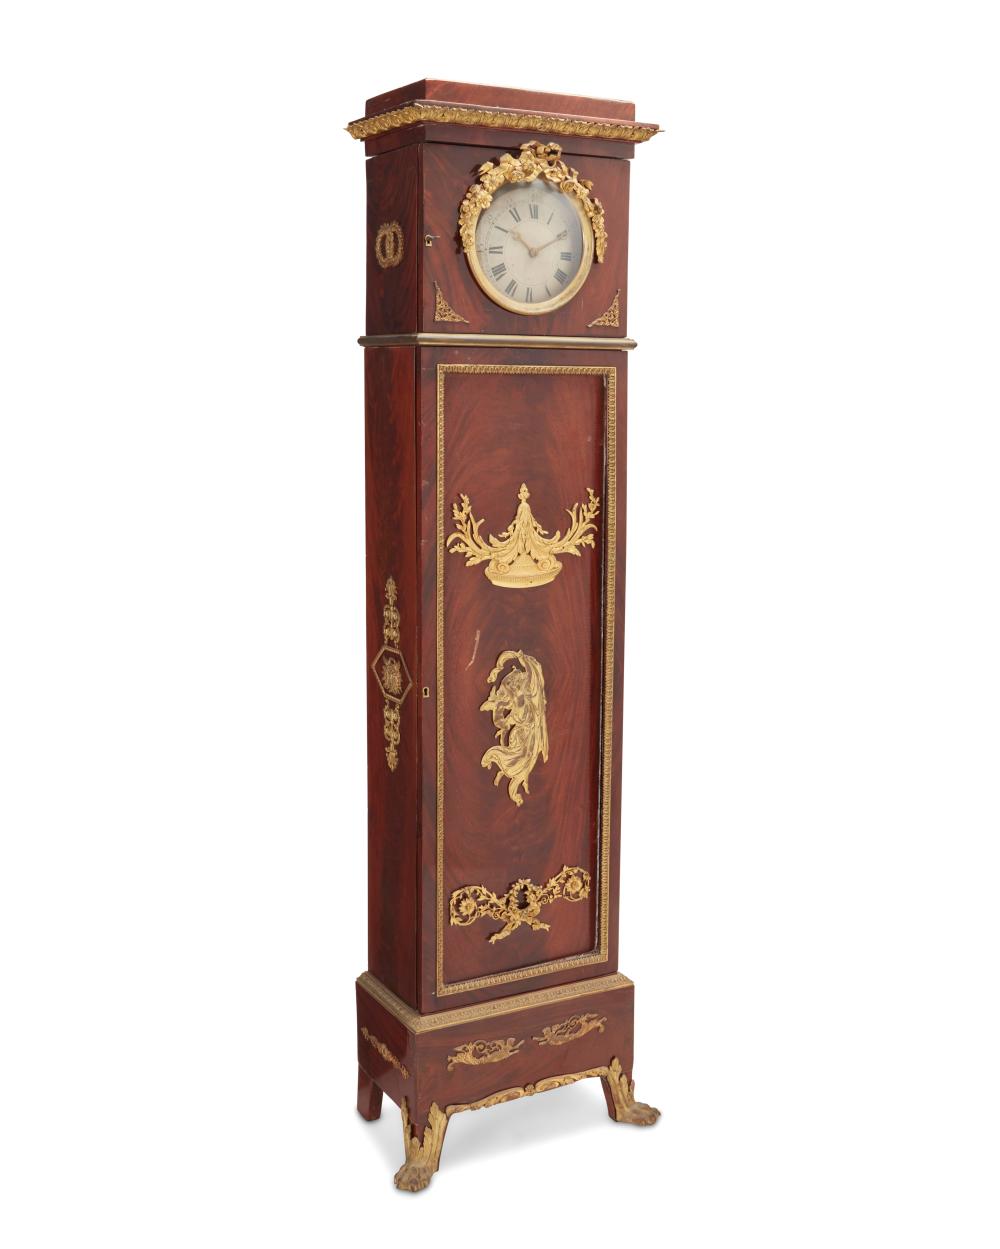 A FRENCH EMPIRE STYLE TALL CASE 2ee8e7